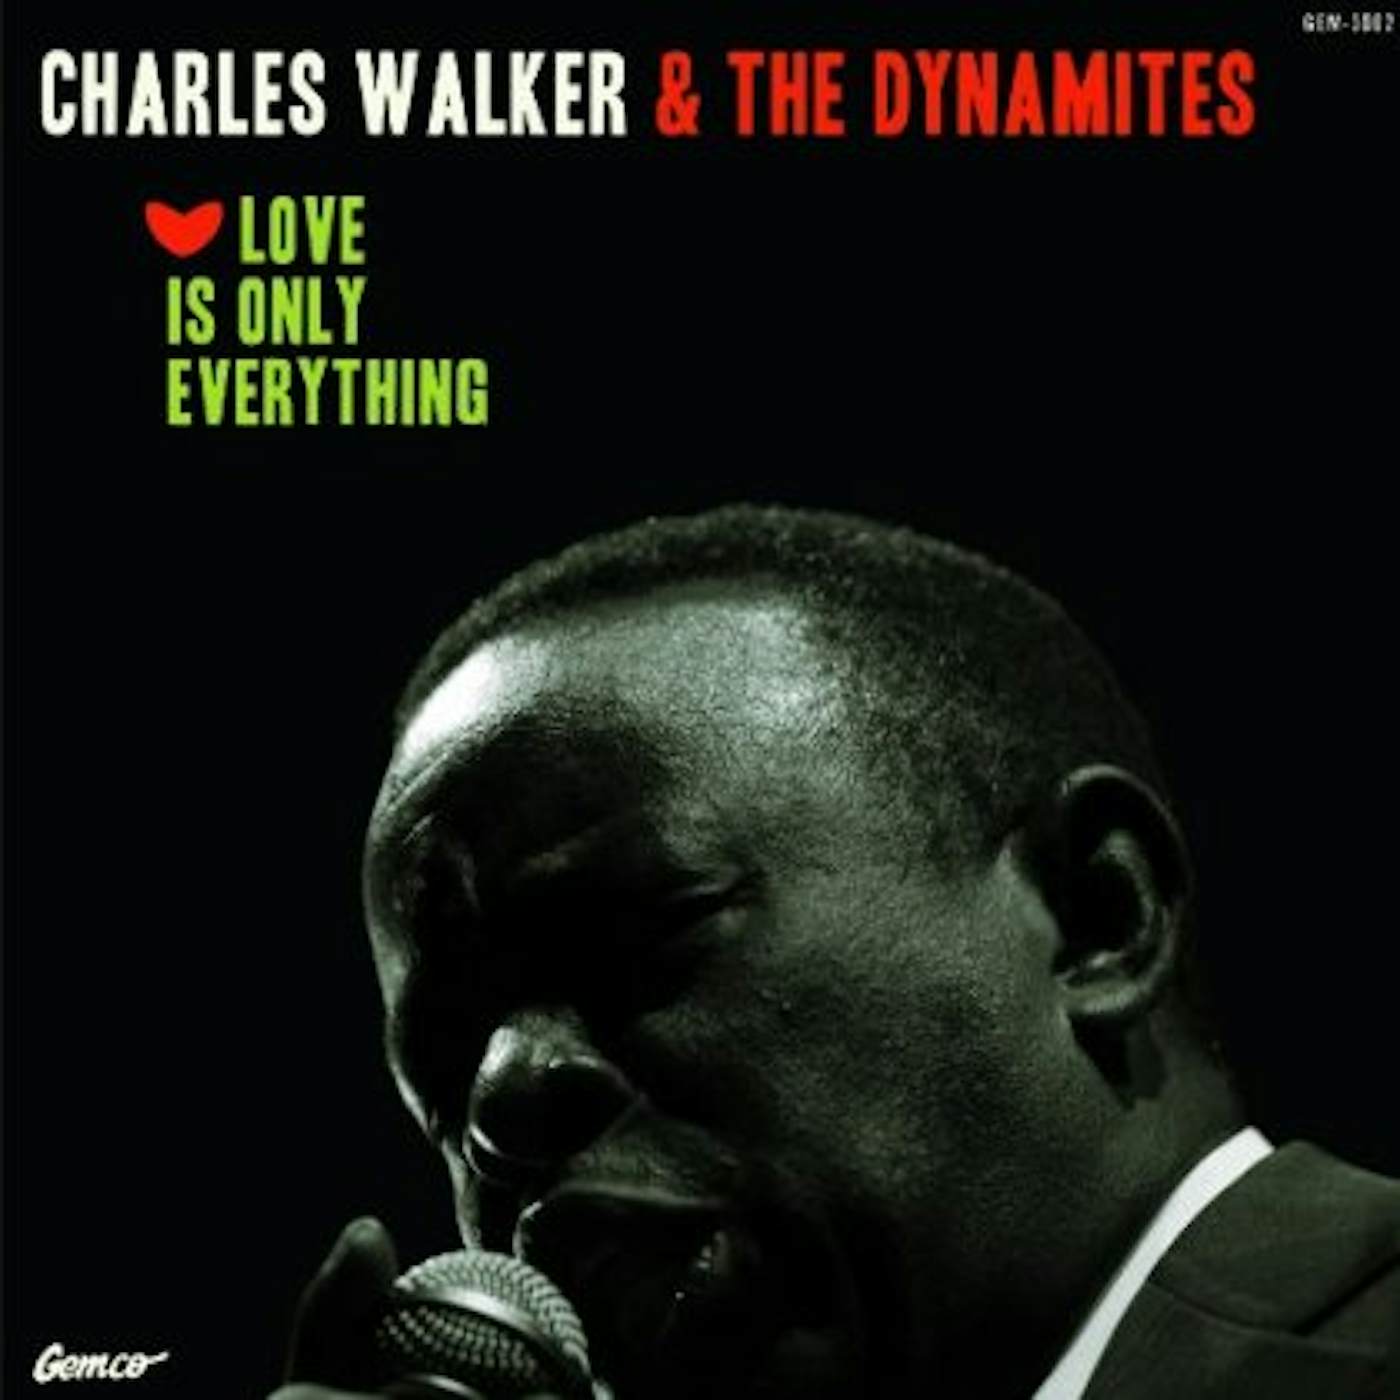 Charles Walker & The Dynamites LOVE IS ONLY EVERYTHING CD